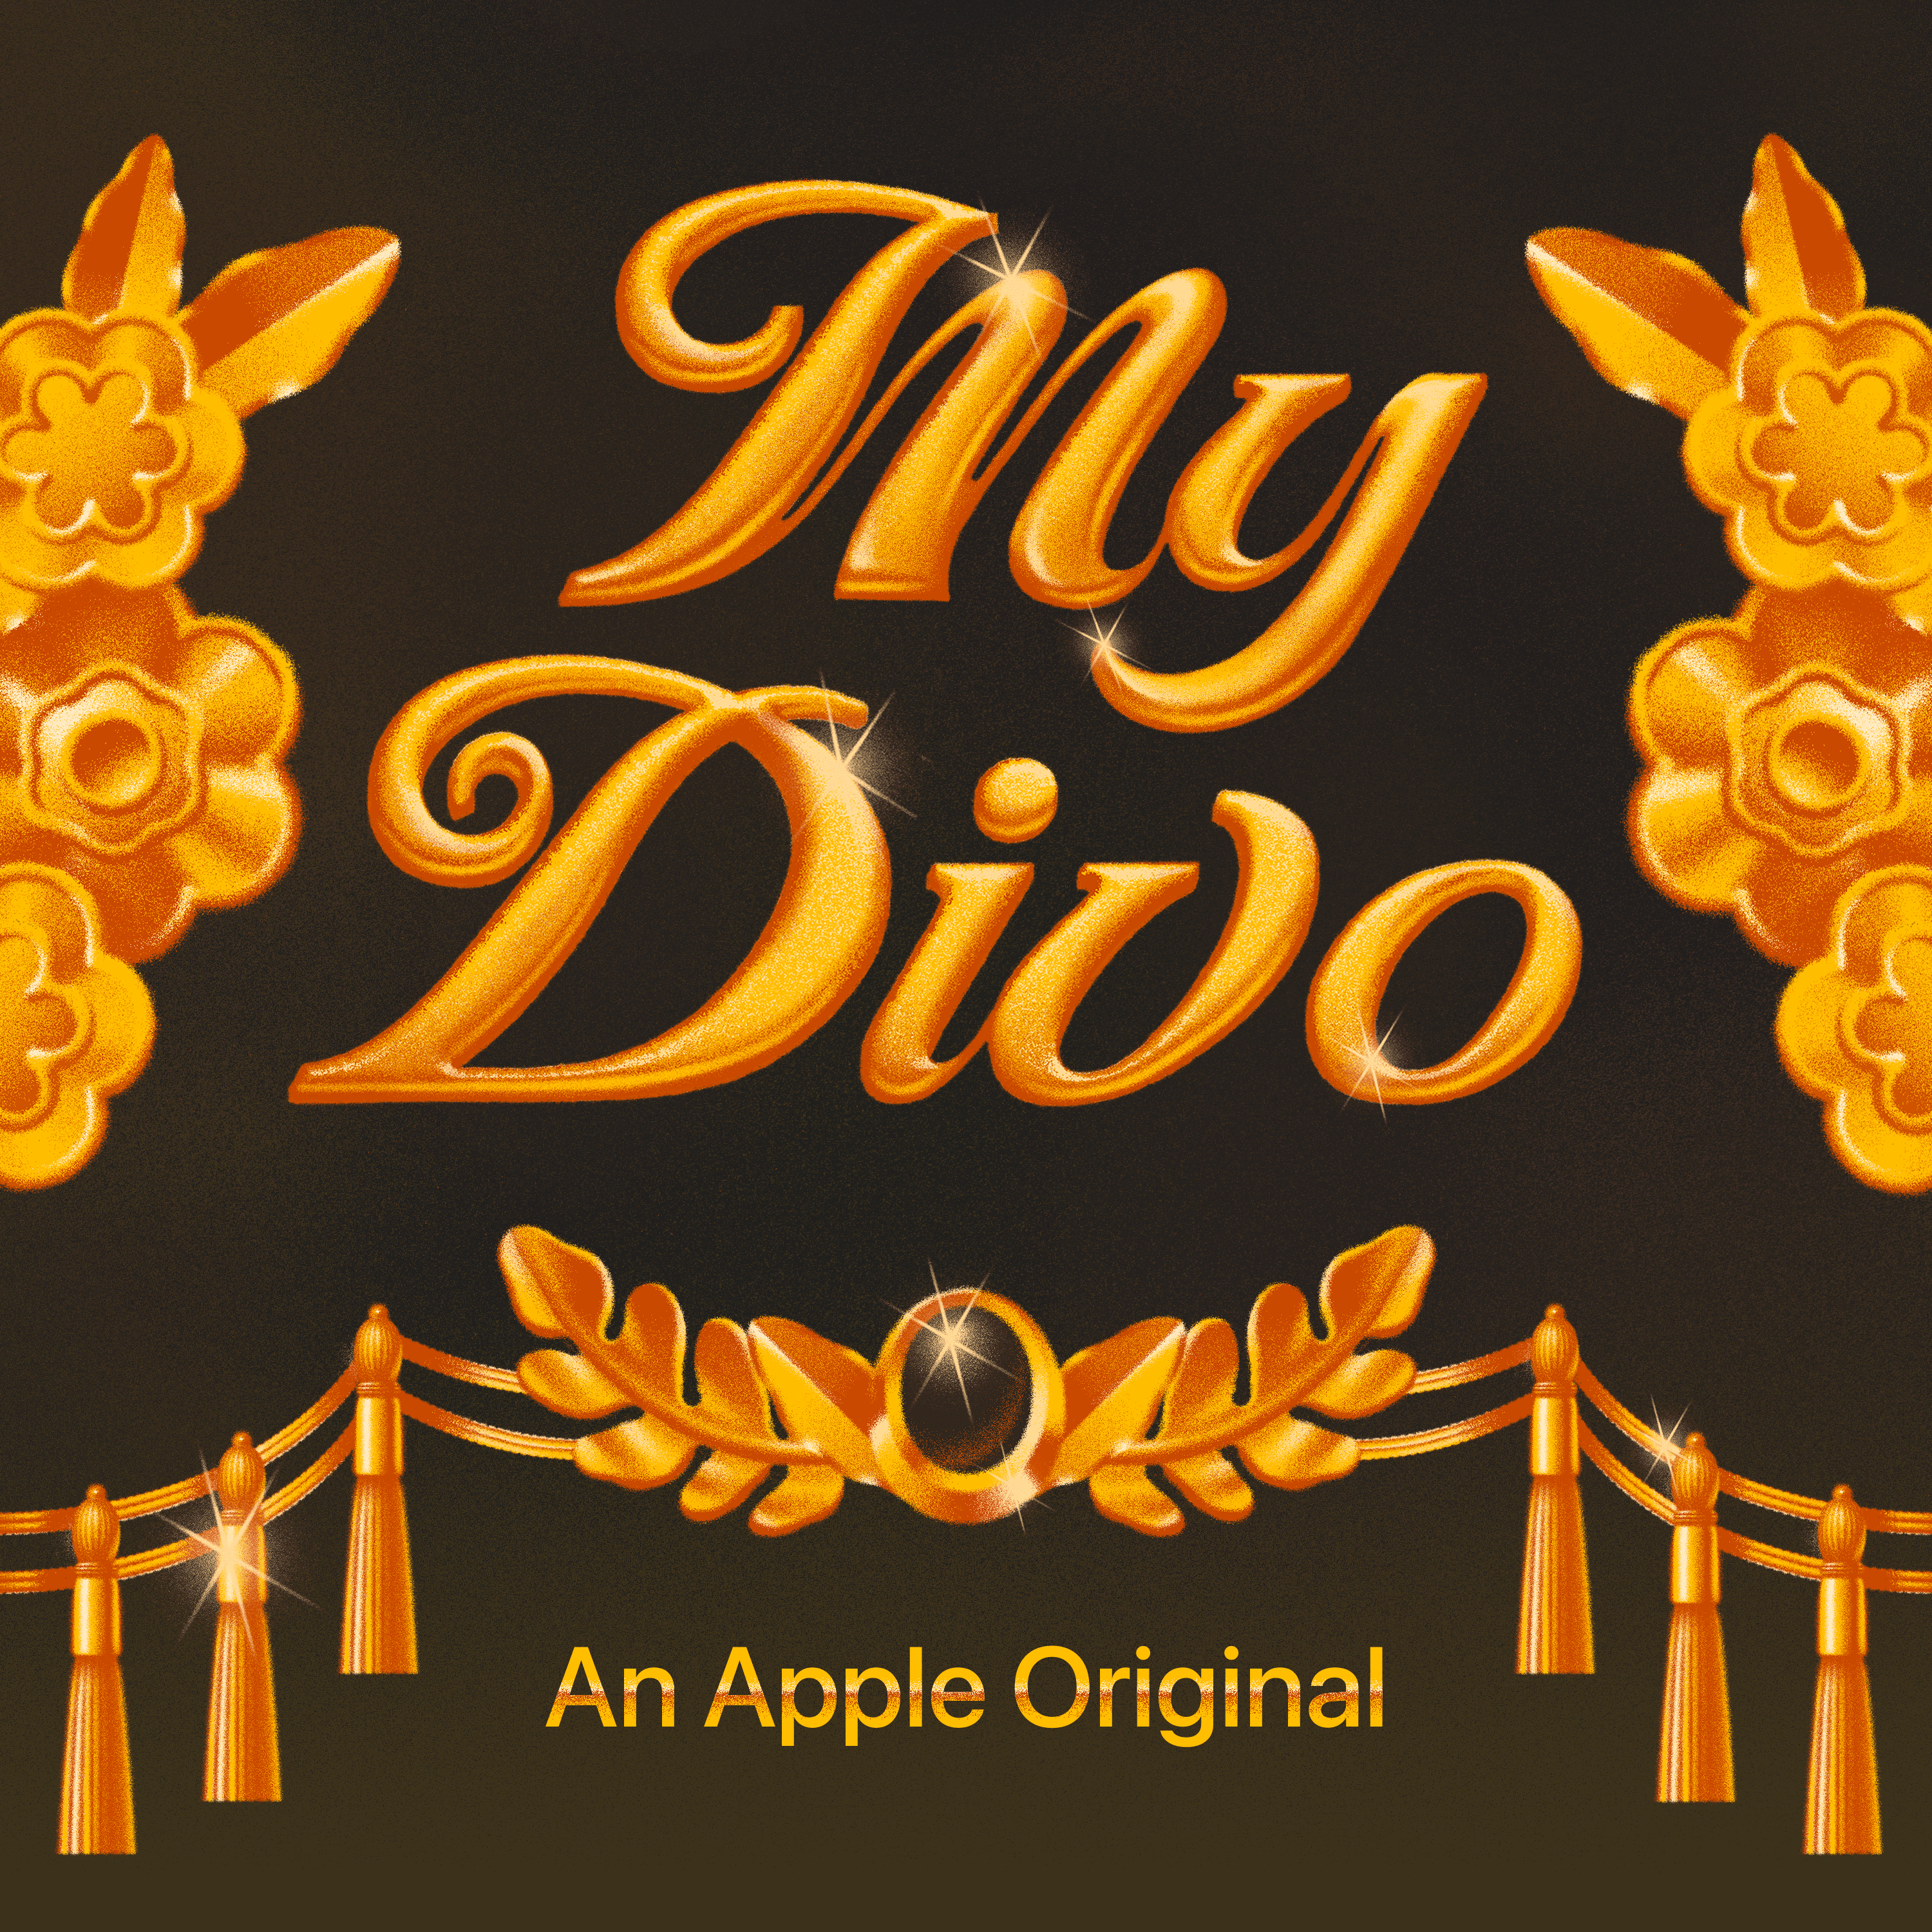 Thumbnail for "Introducing: My Divo".